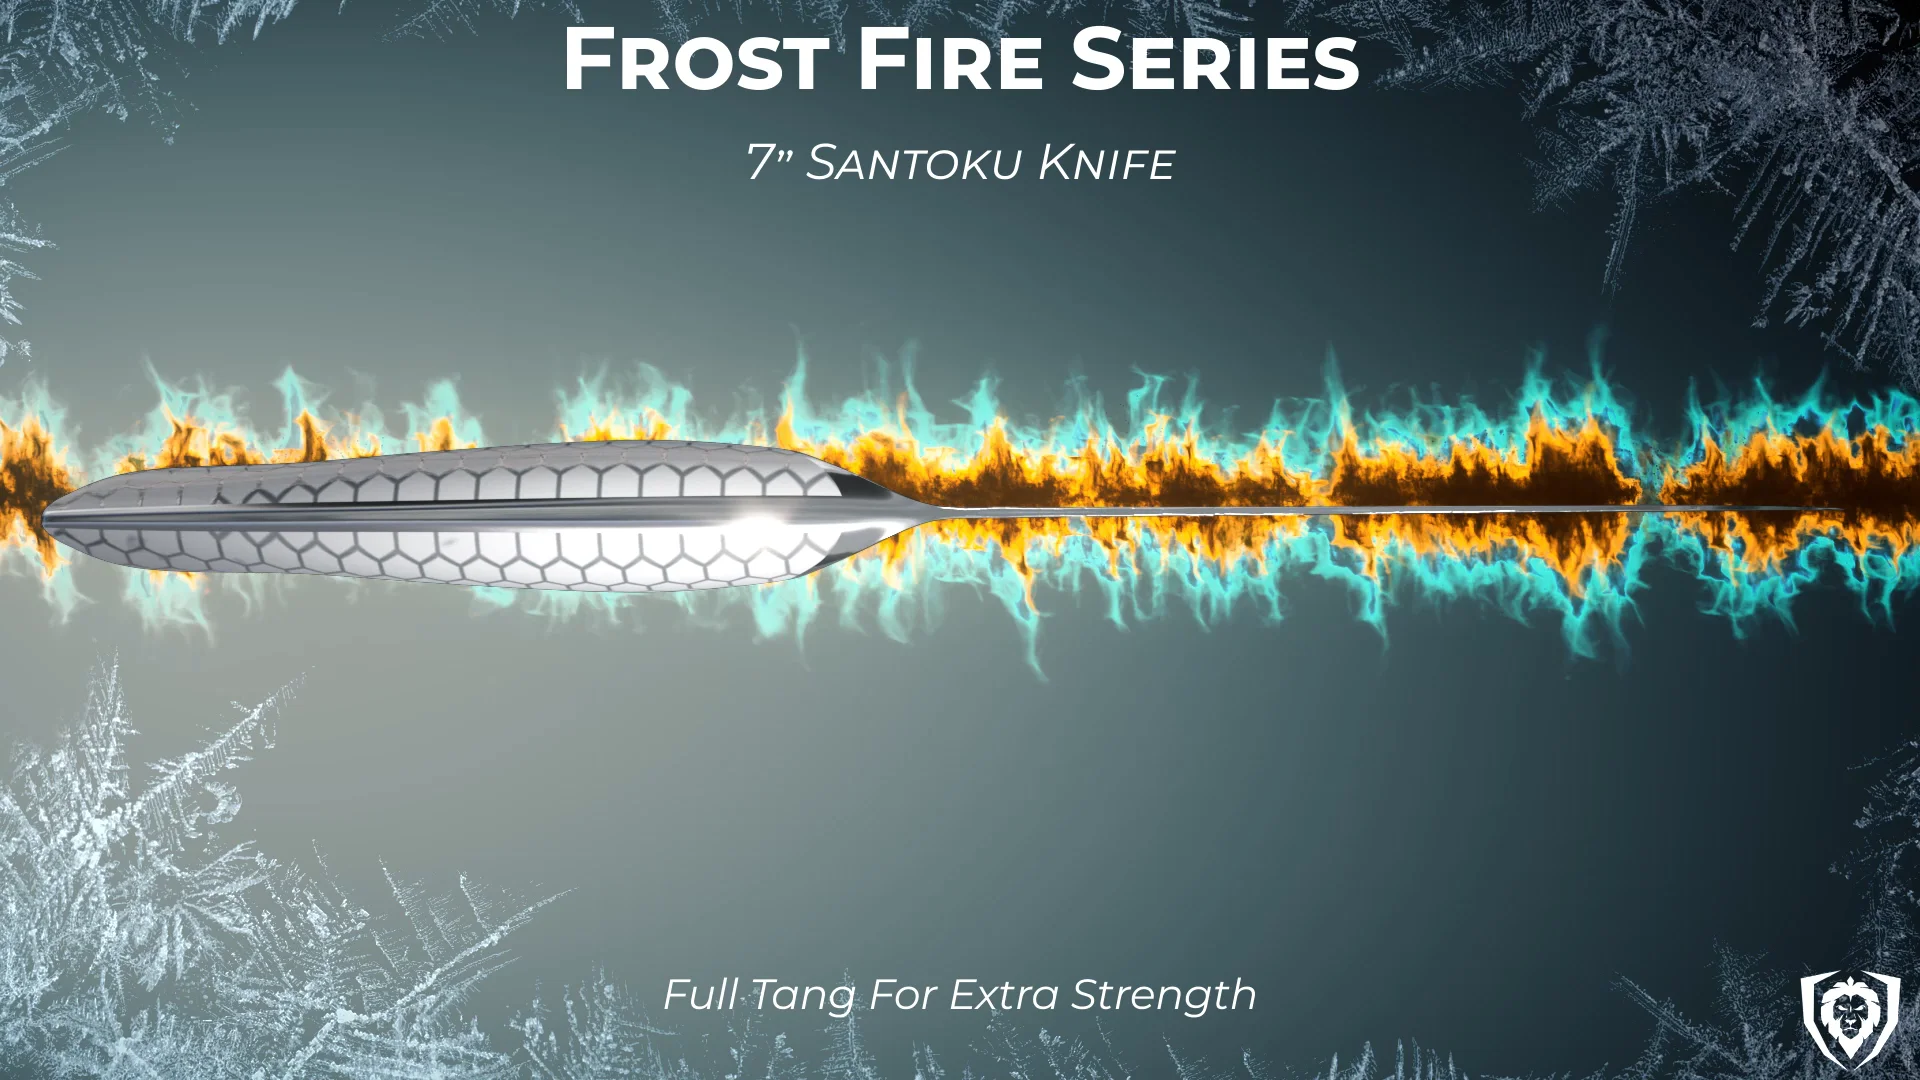 7 Santoku Knife | The Frost Fire Series | Dalstrong